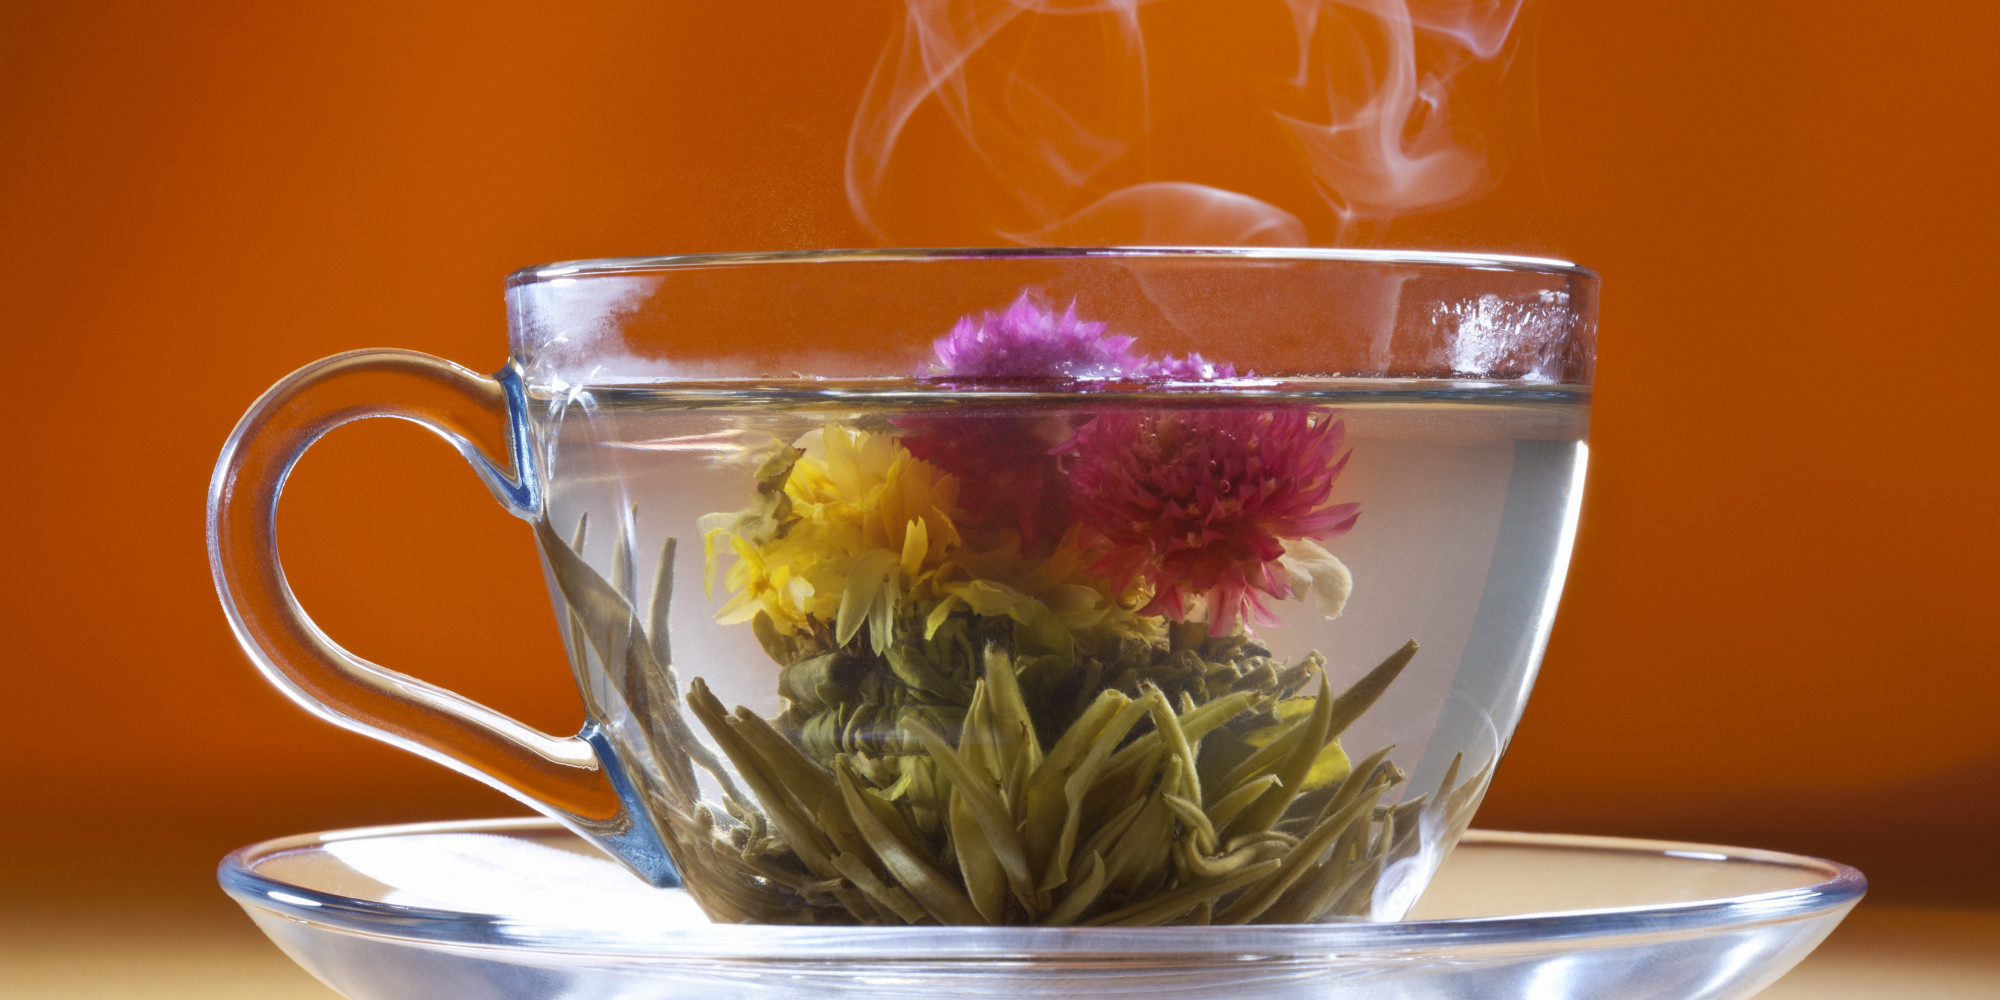 Do You Think Flowering Tea Is Revolting Or Amazing? (PHOTOS) | HuffPost